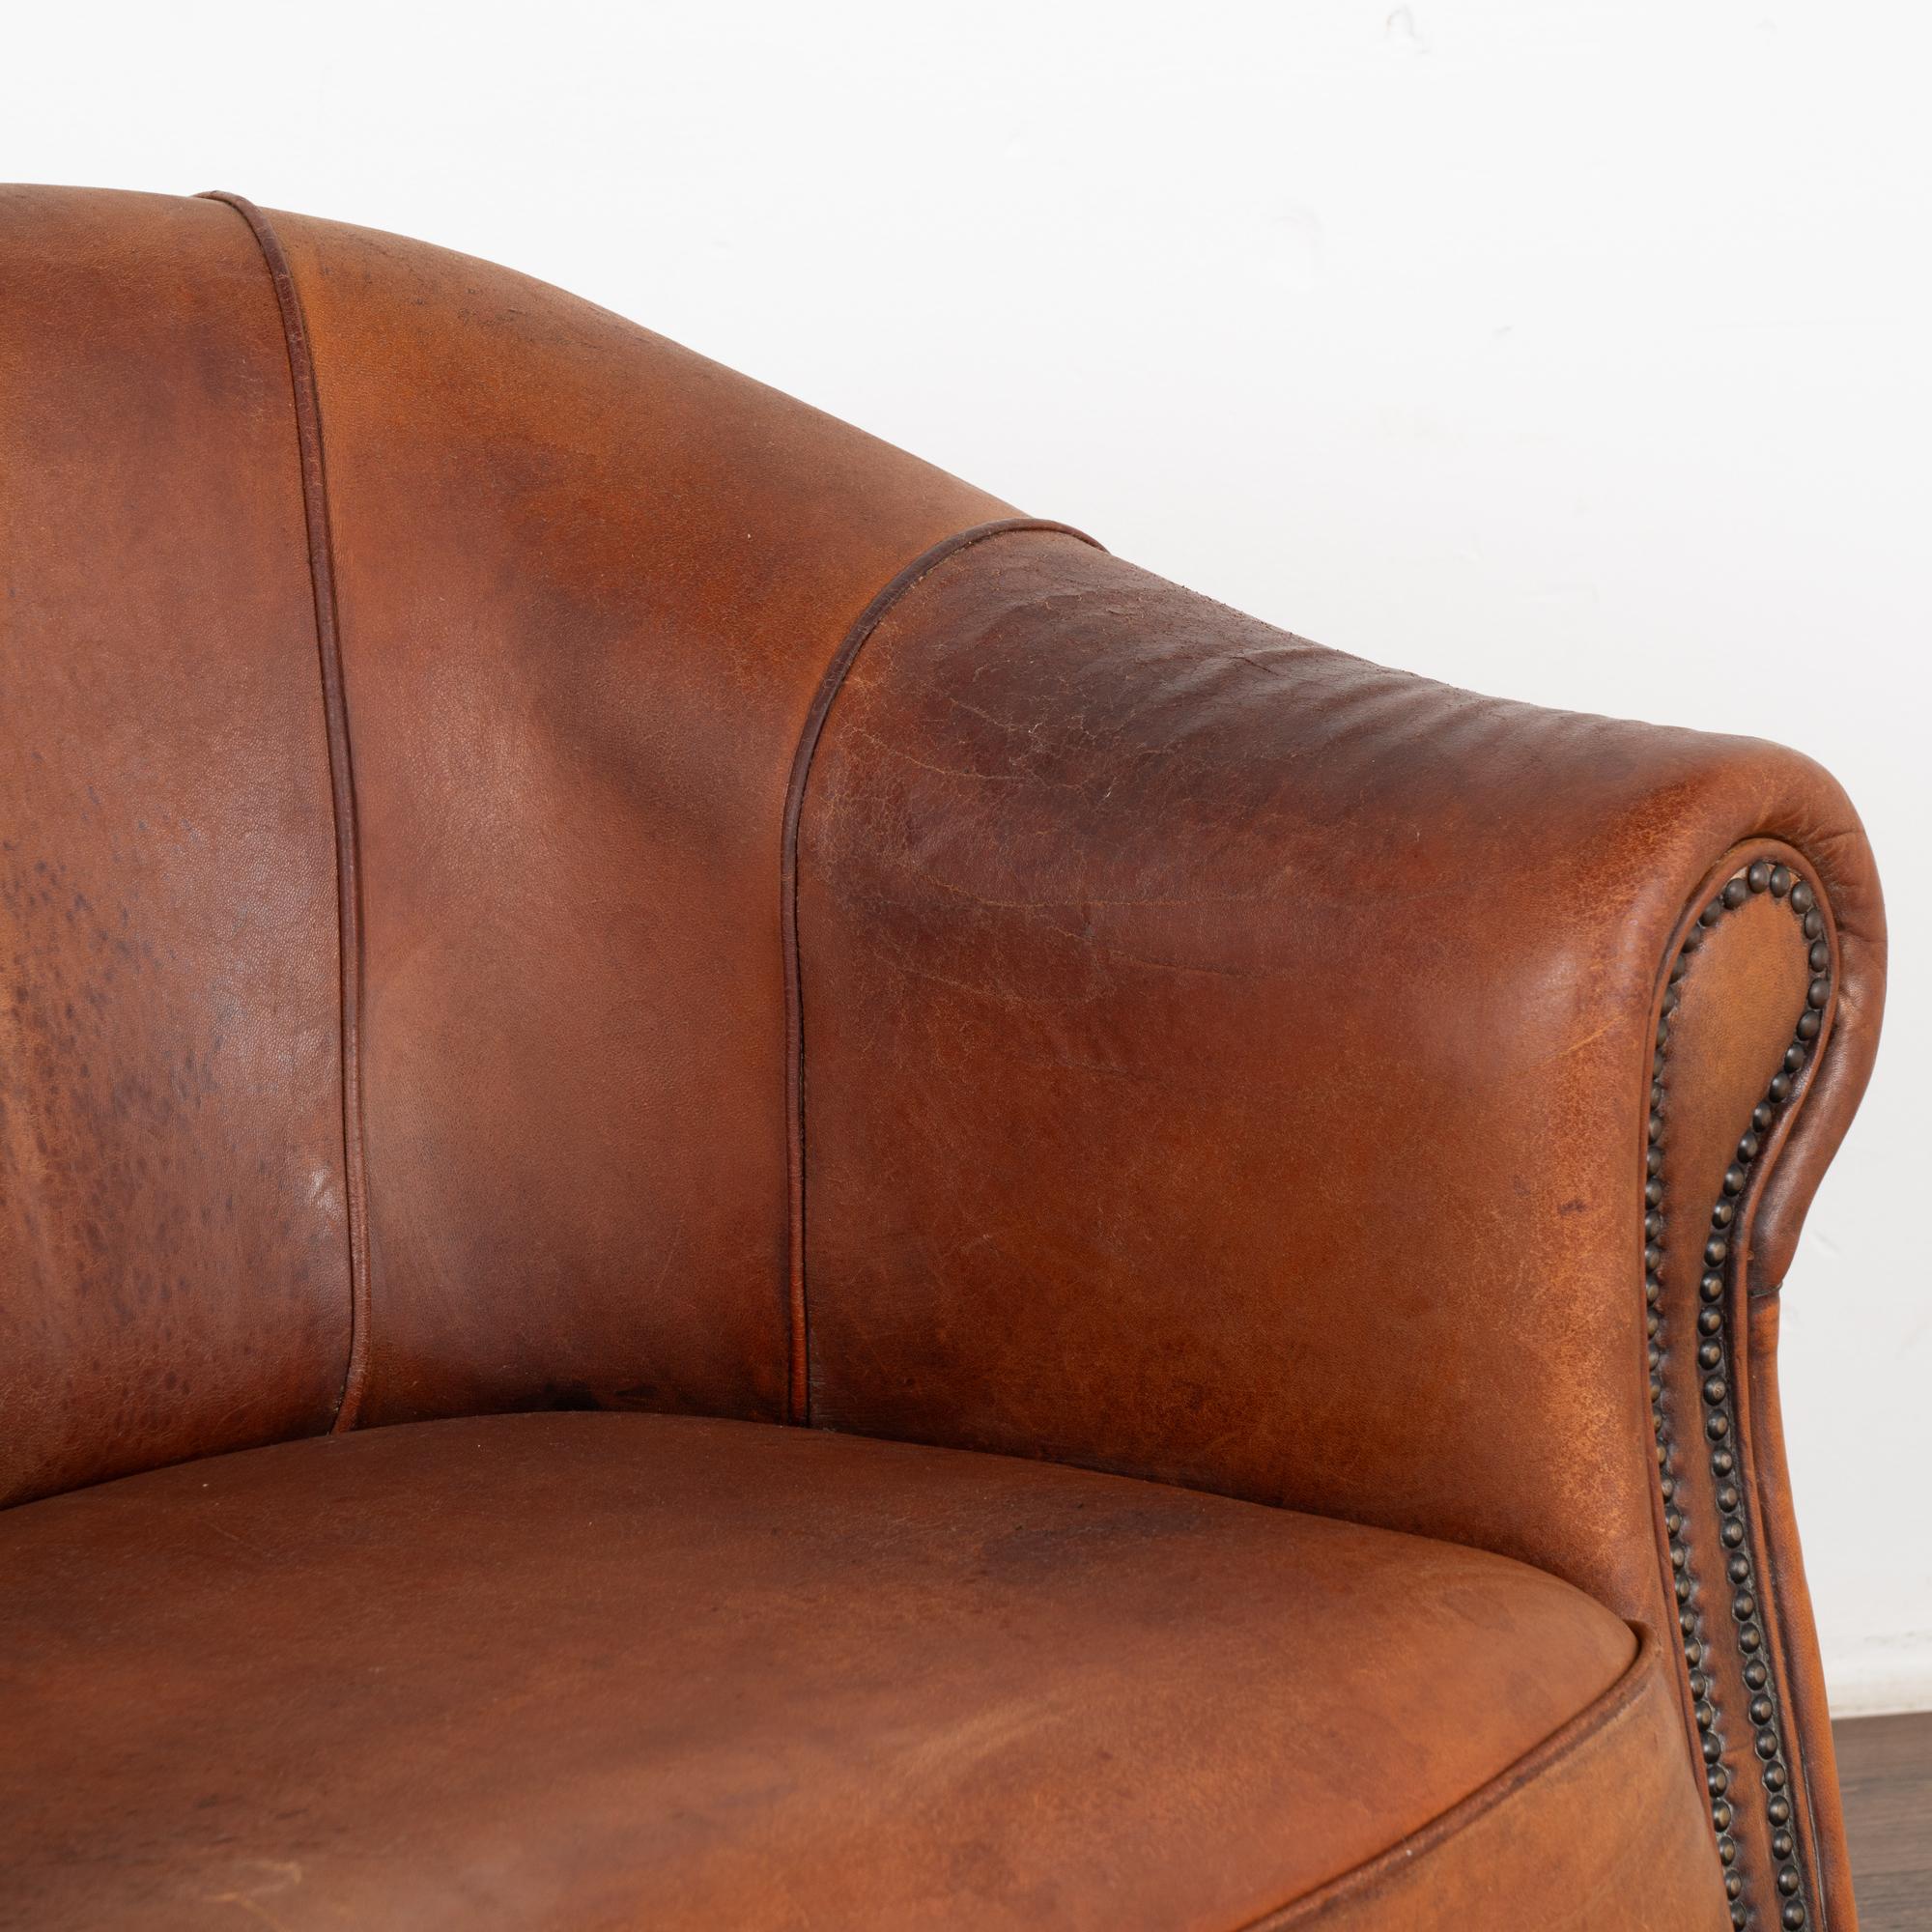 Vintage Brown Leather Two Seat Sofa Loveseat, France circa 1920-40 1